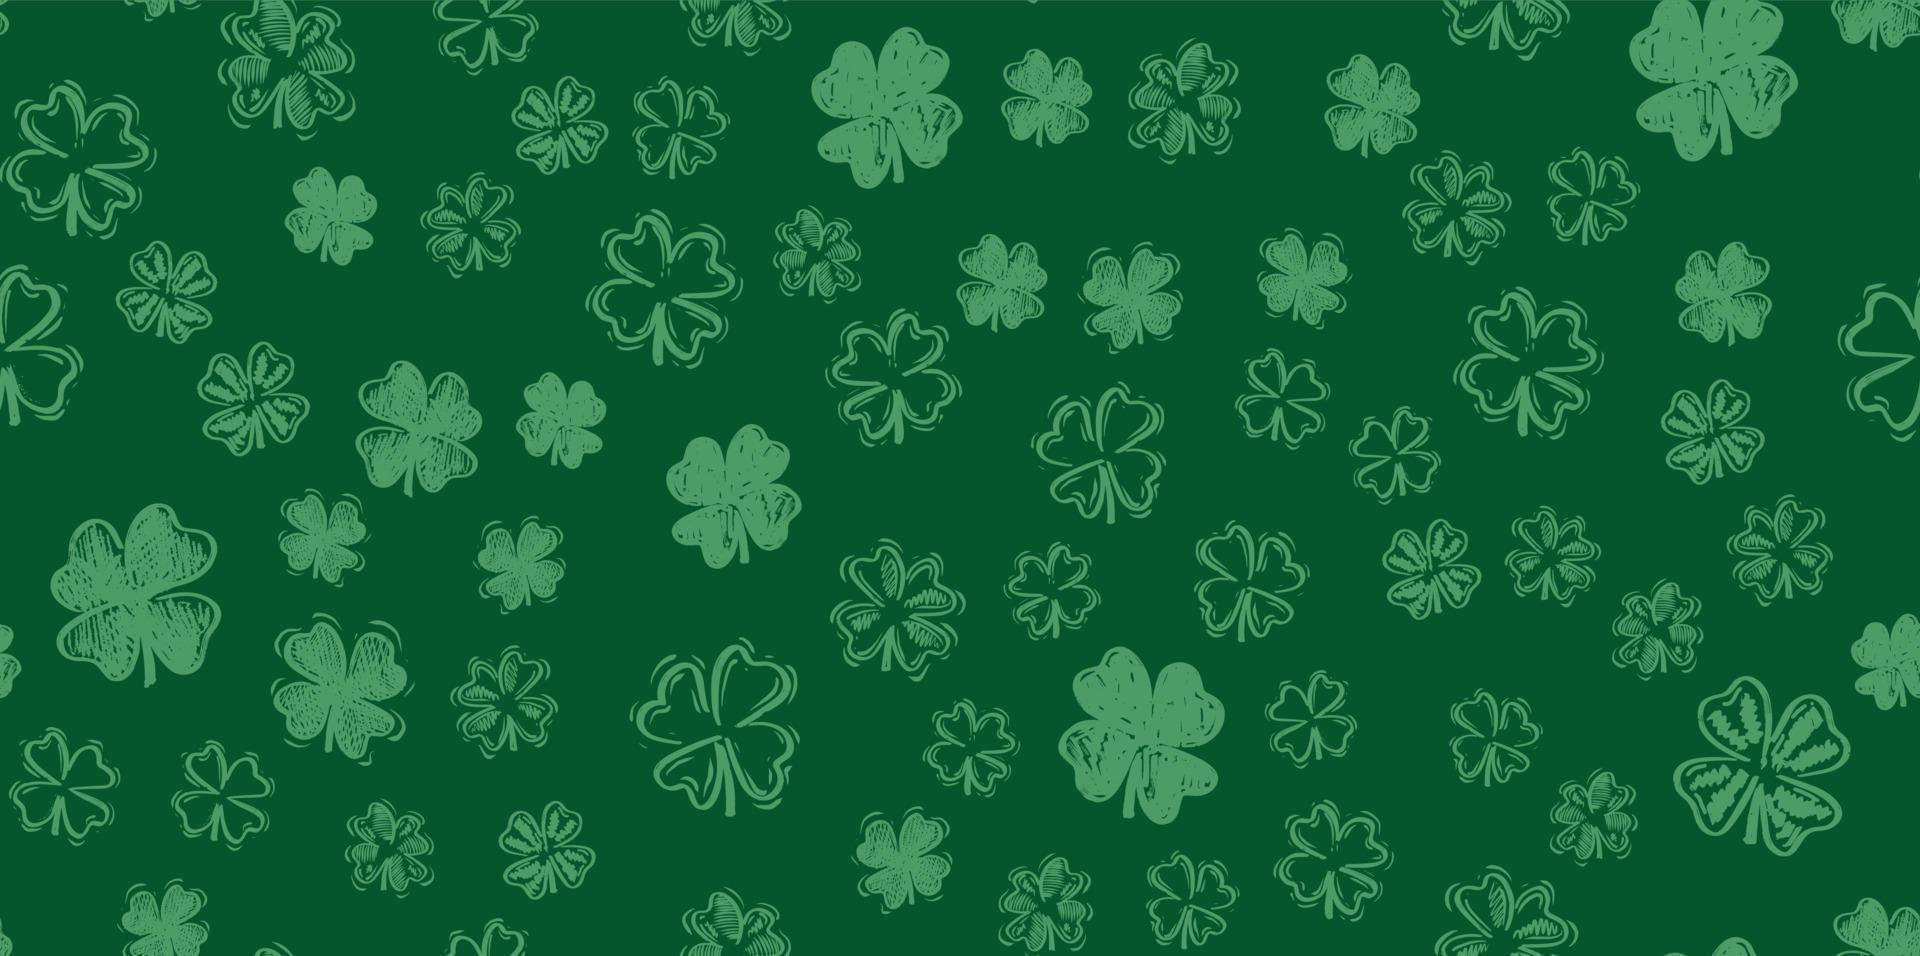 Saint Patricks Day, festive background with flying clover. vector